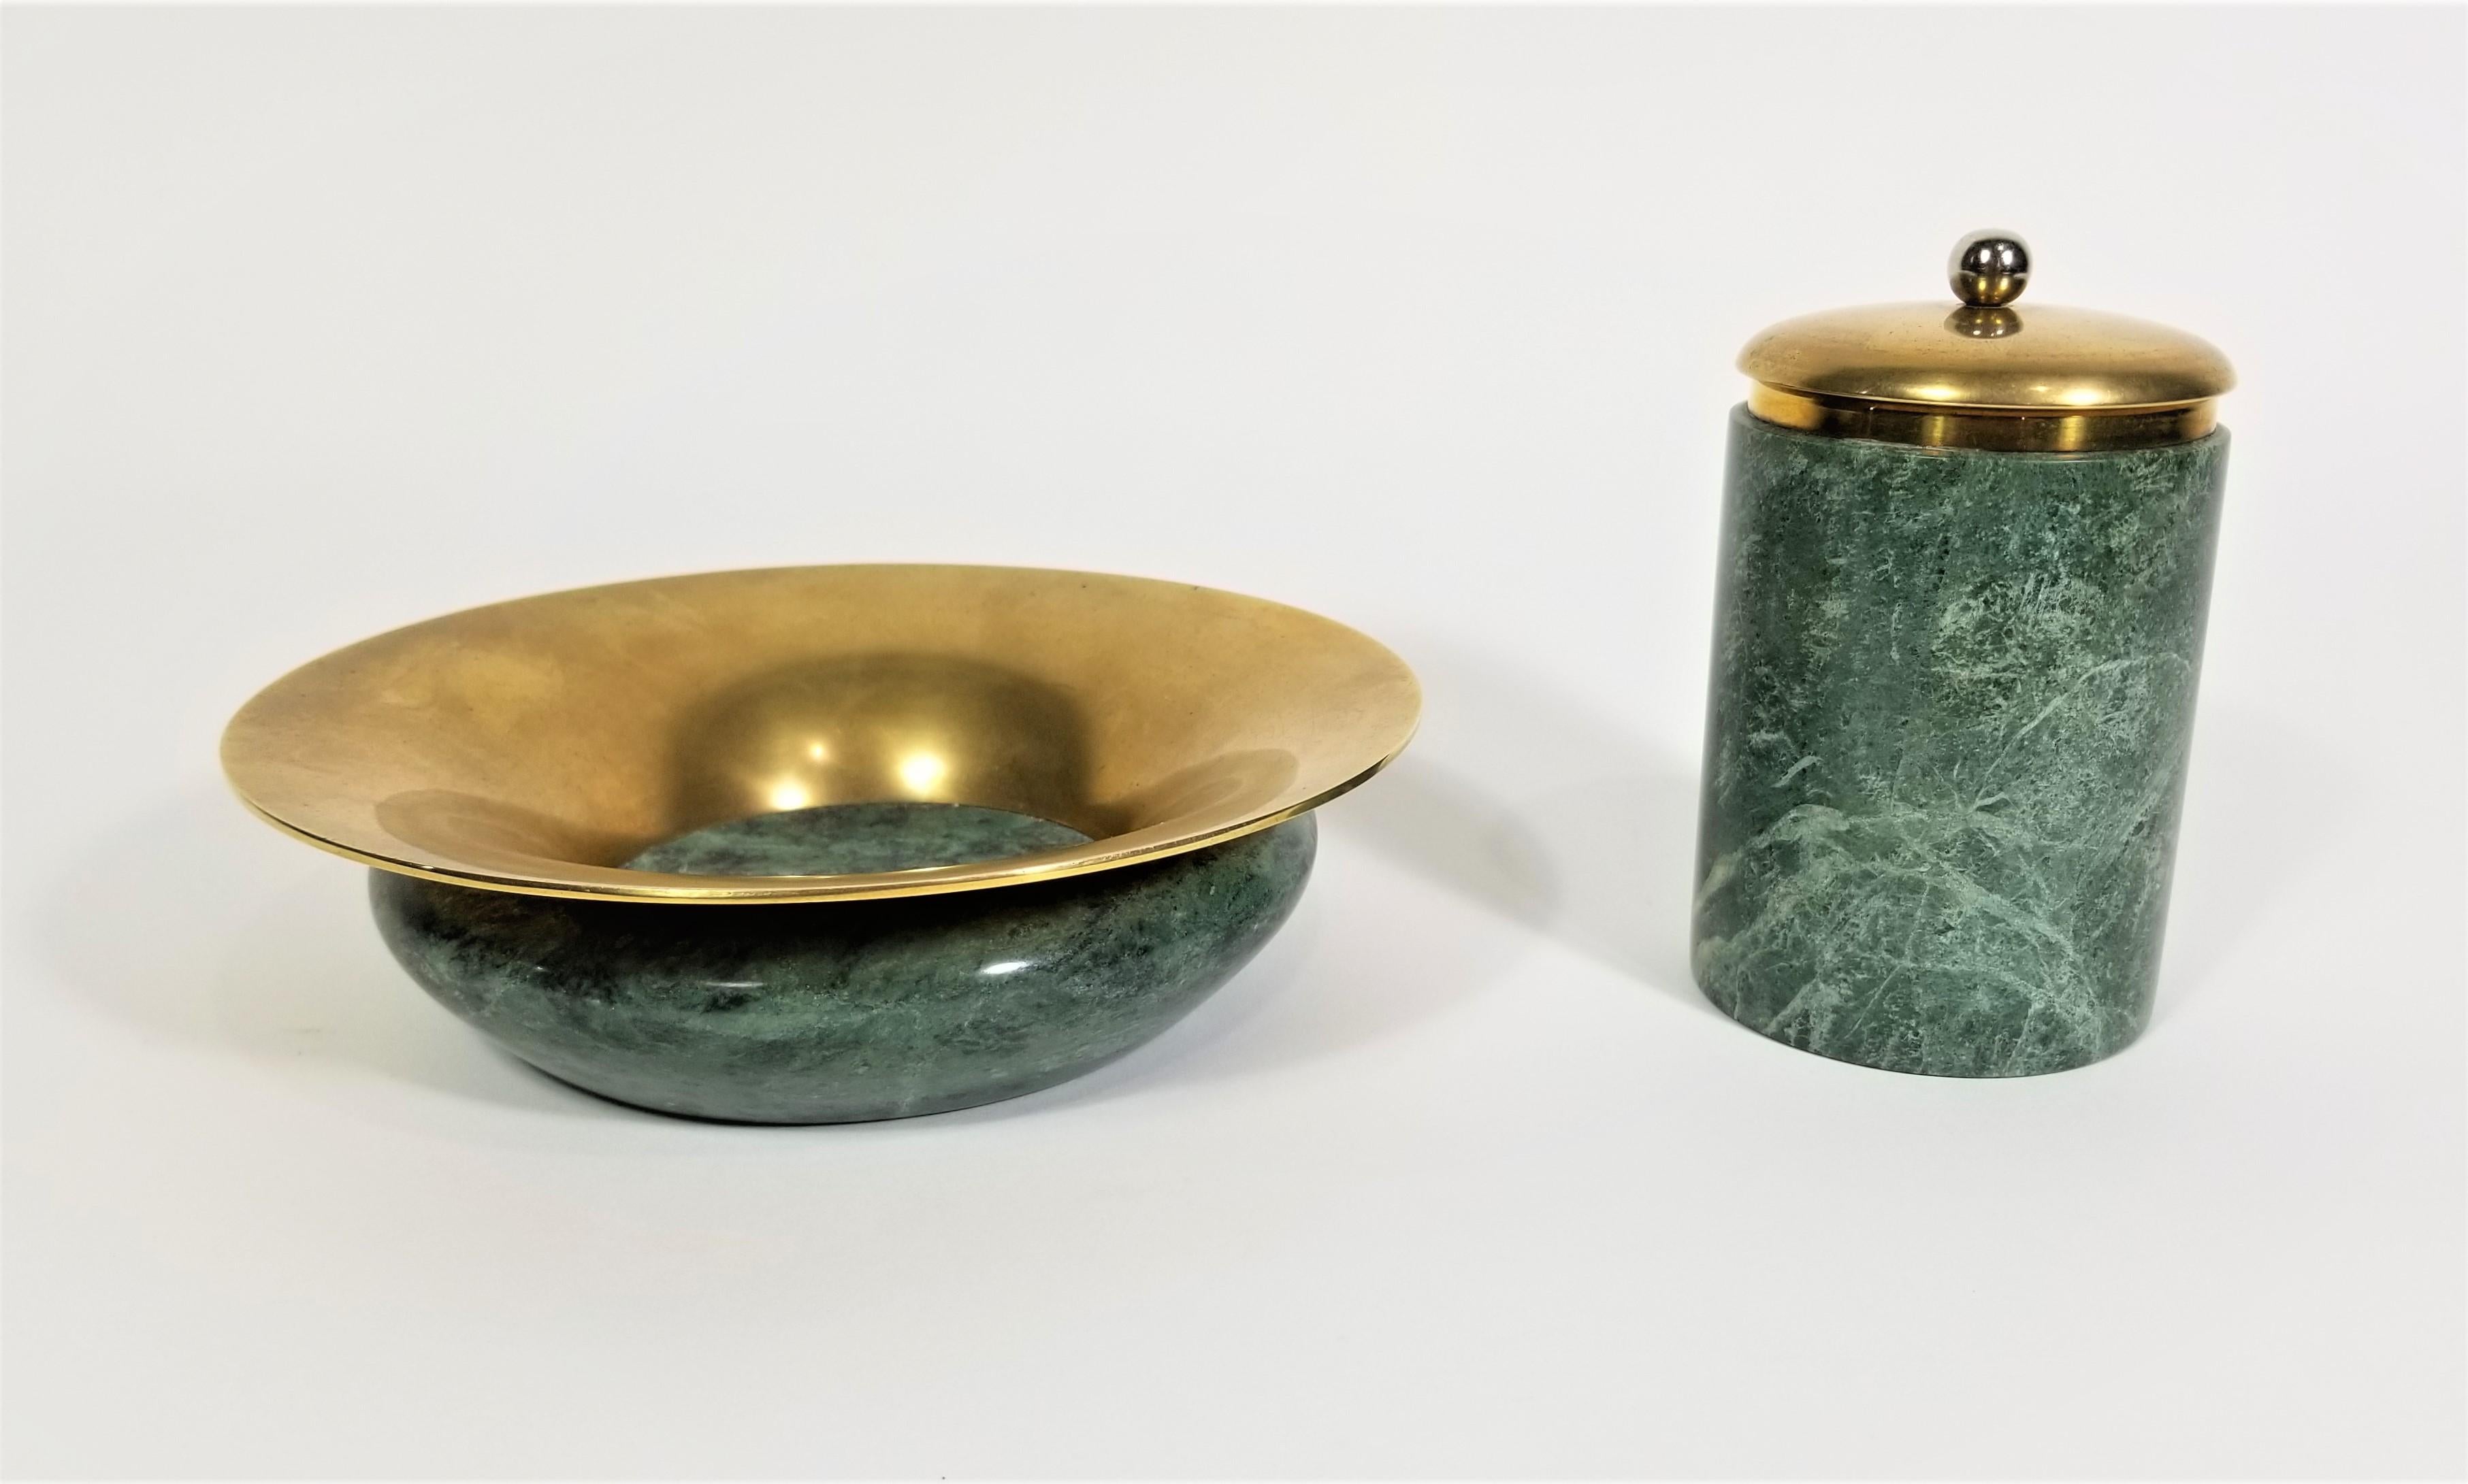 1970s 1980s Ashtray or bowl and Lidded Holder. 
Green Marble and Brass. 

Measurements:
Ashtray / Bowl Height: 2.0 inches
Ashtray / bowl Diameter: 7.0 inches

Holder Height: 4.63 inches
Holder Diameter: 2.75 inches.